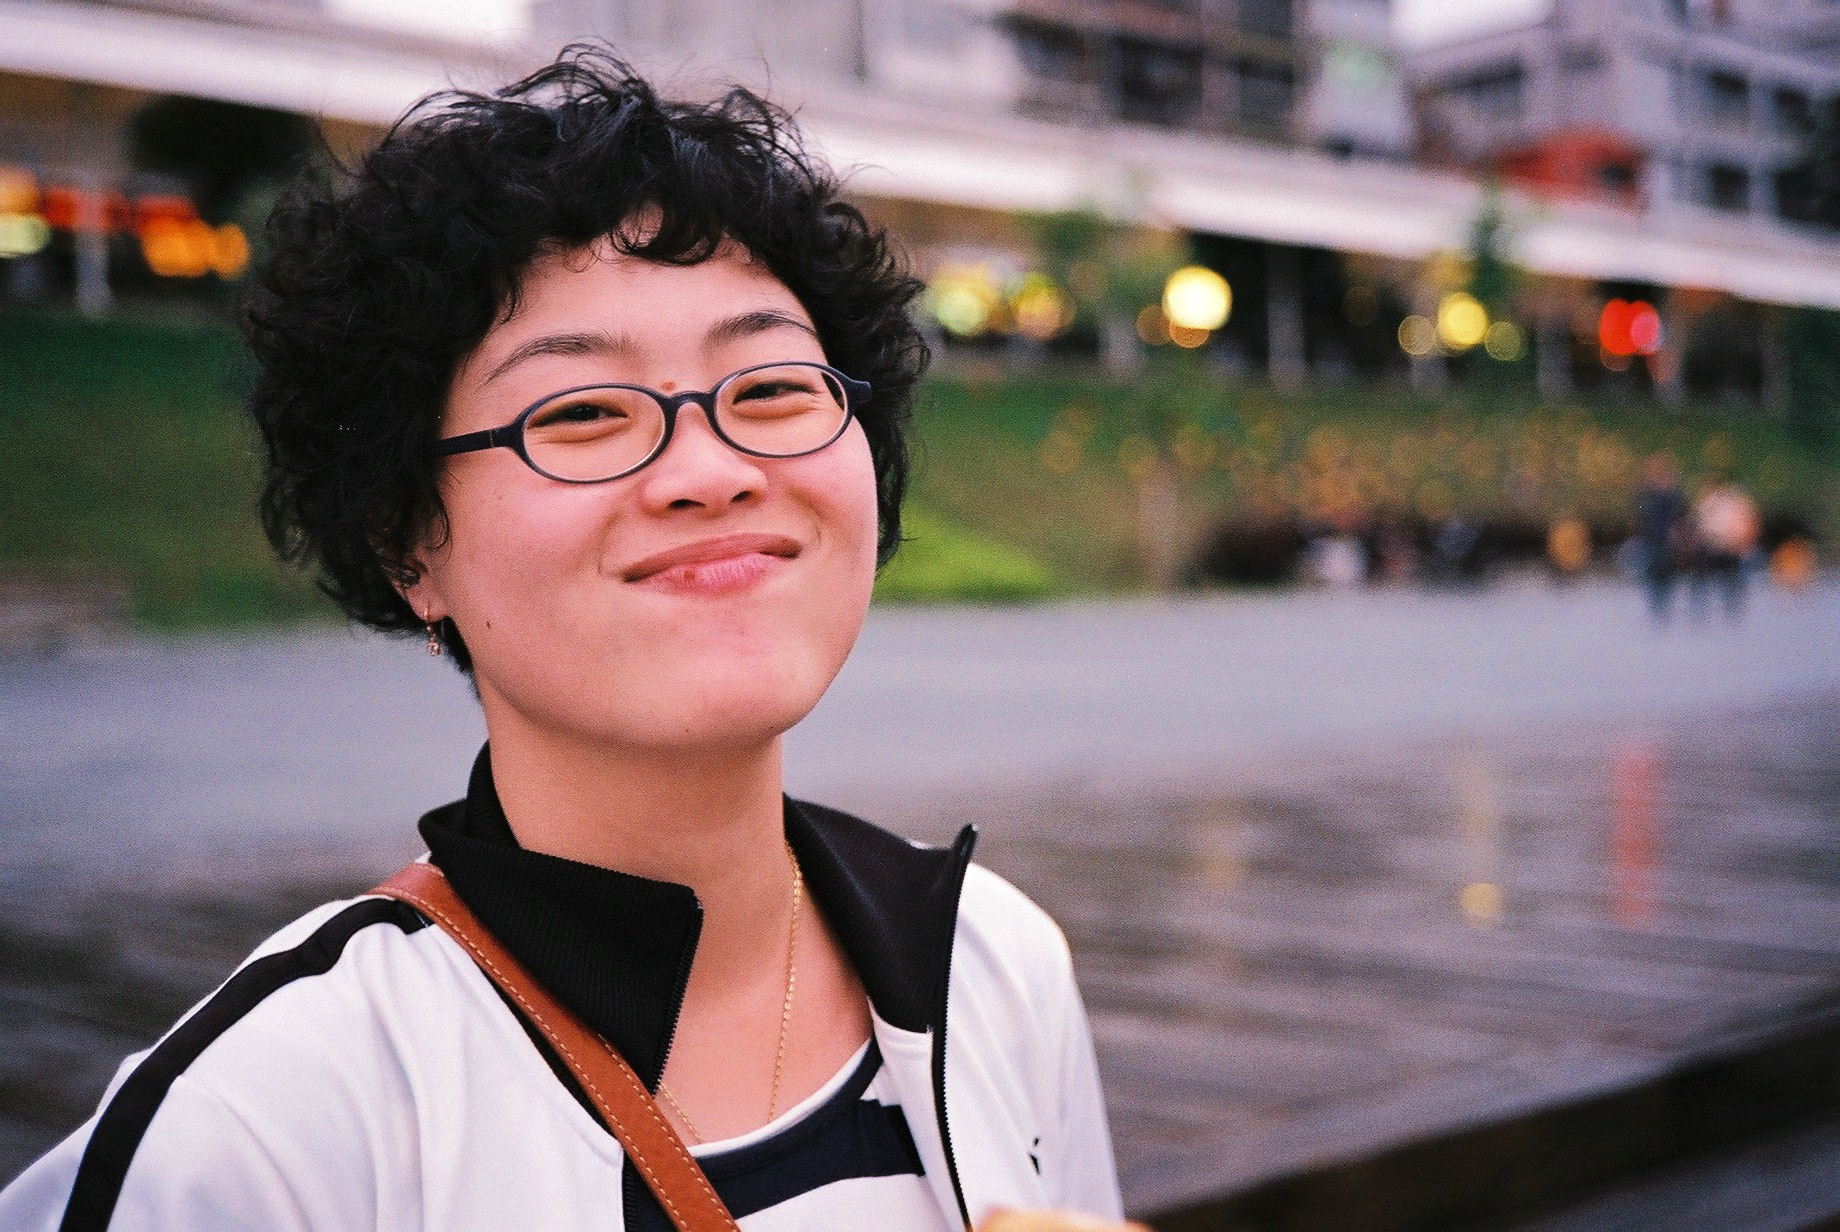 a woman wearing glasses and a striped shirt